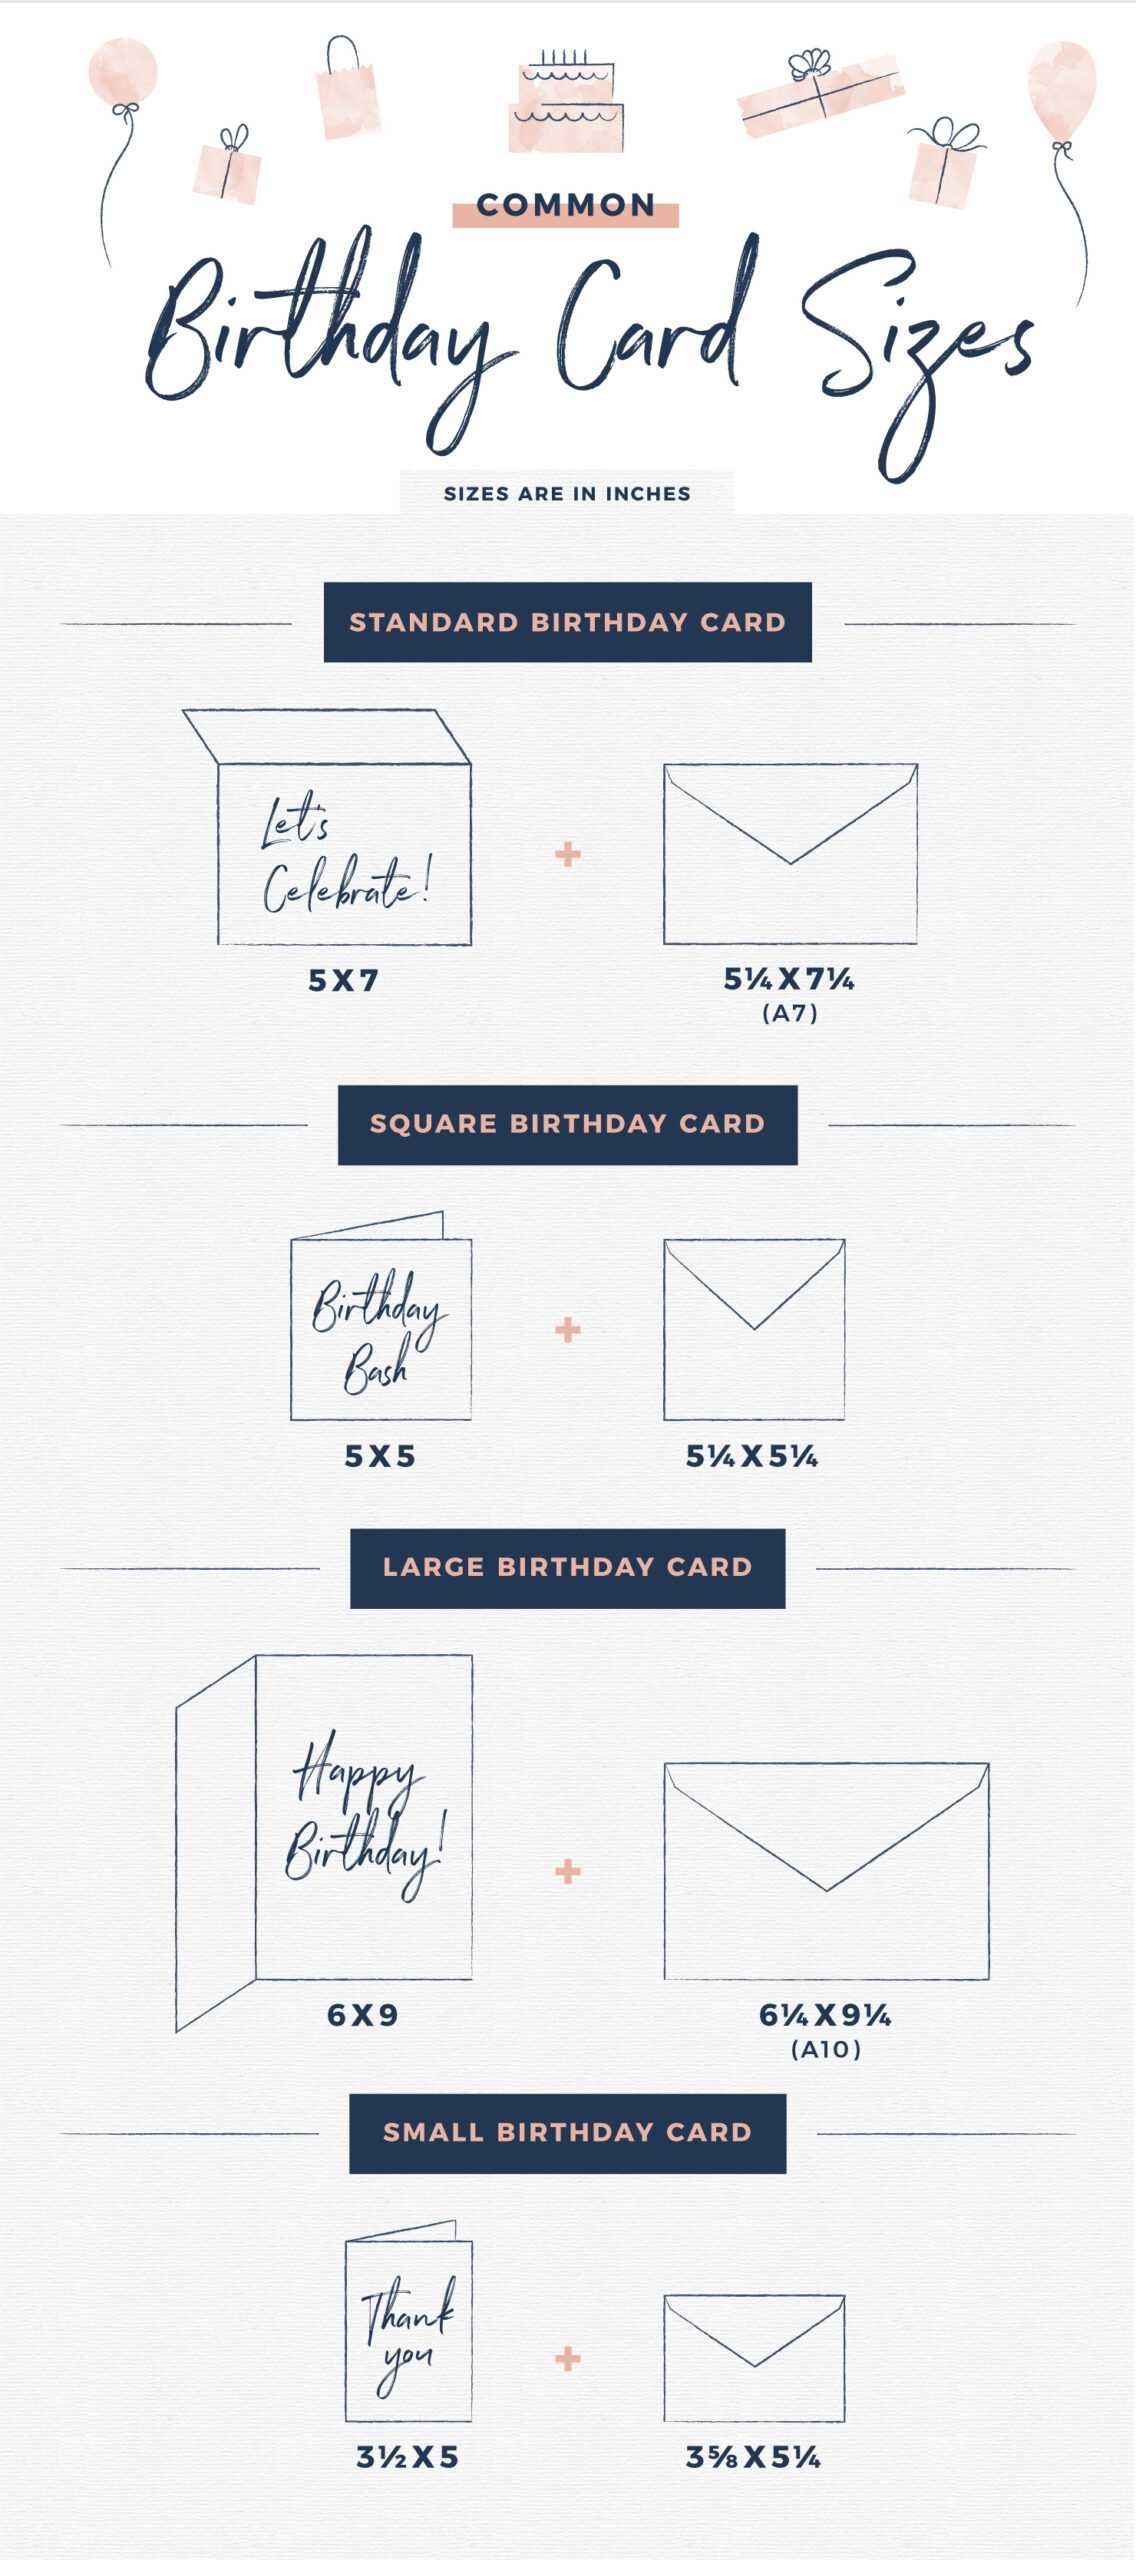 Birthday Card Sizes For Every Need + Party Planning Tips Inside Foldable Birthday Card Template